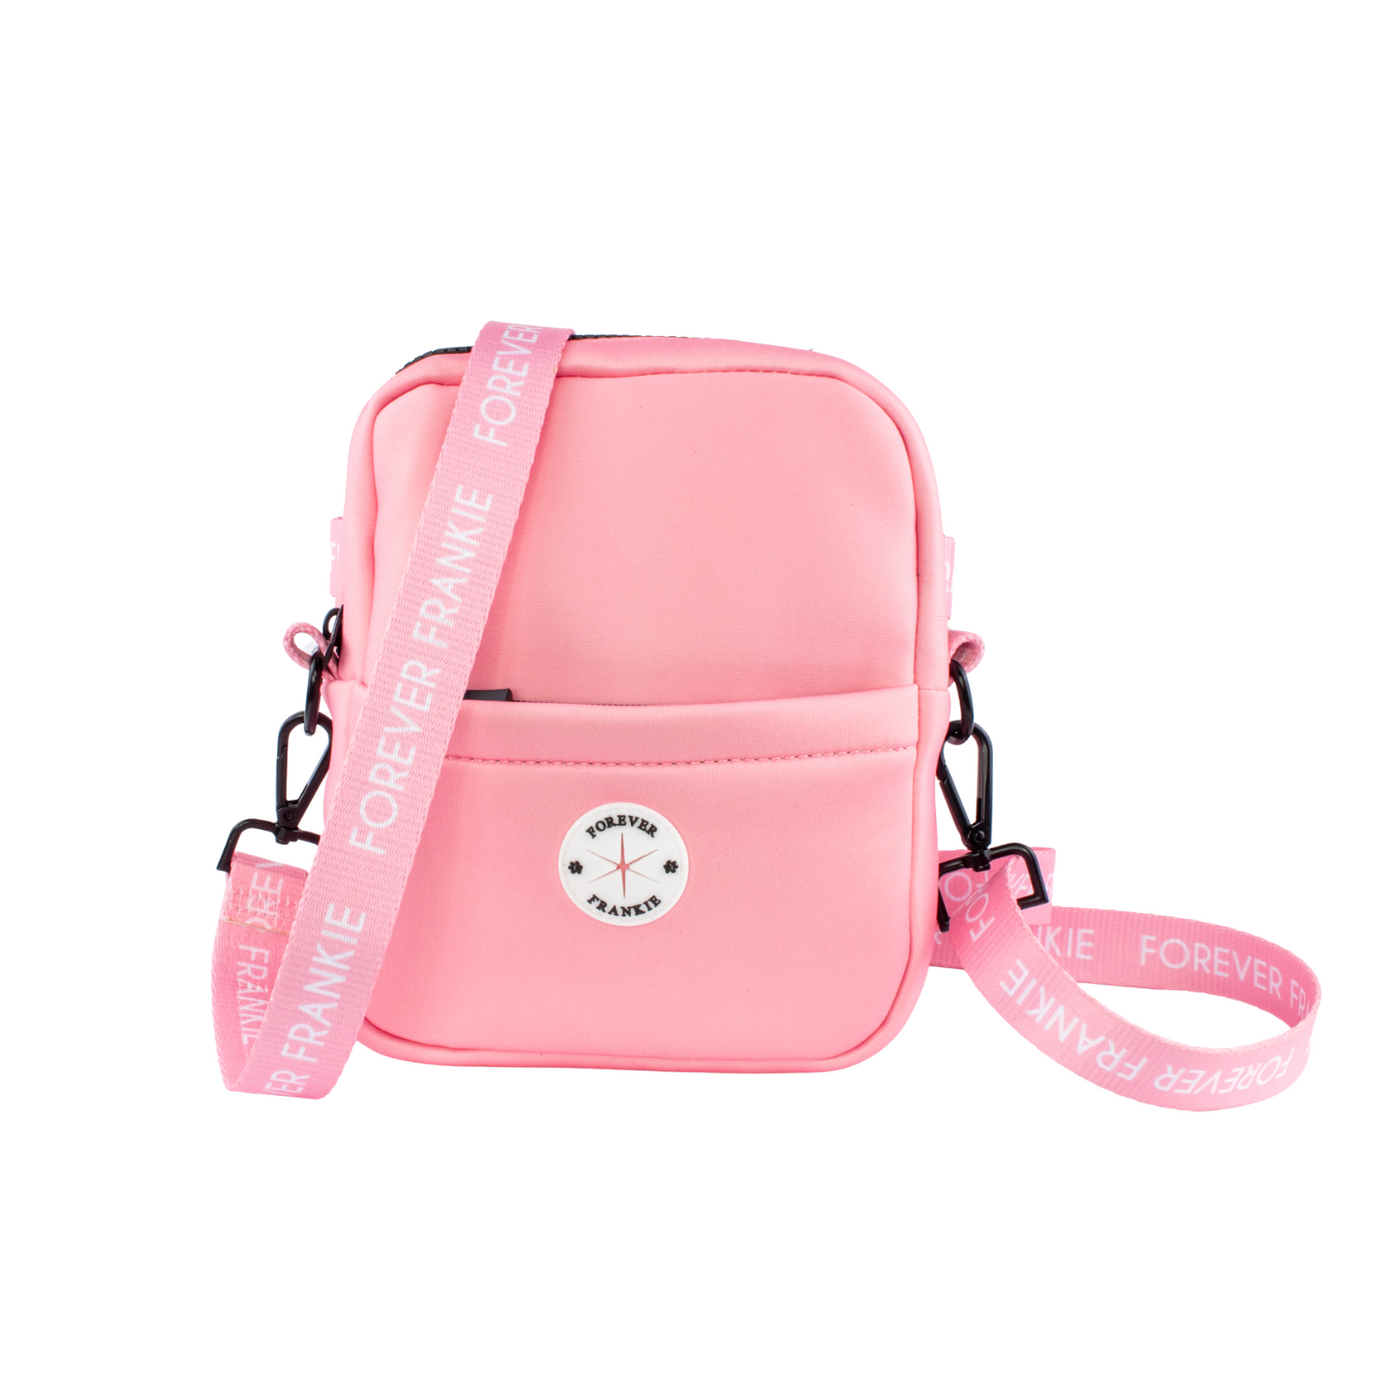 On The Go Travel Bag - Baby Pink